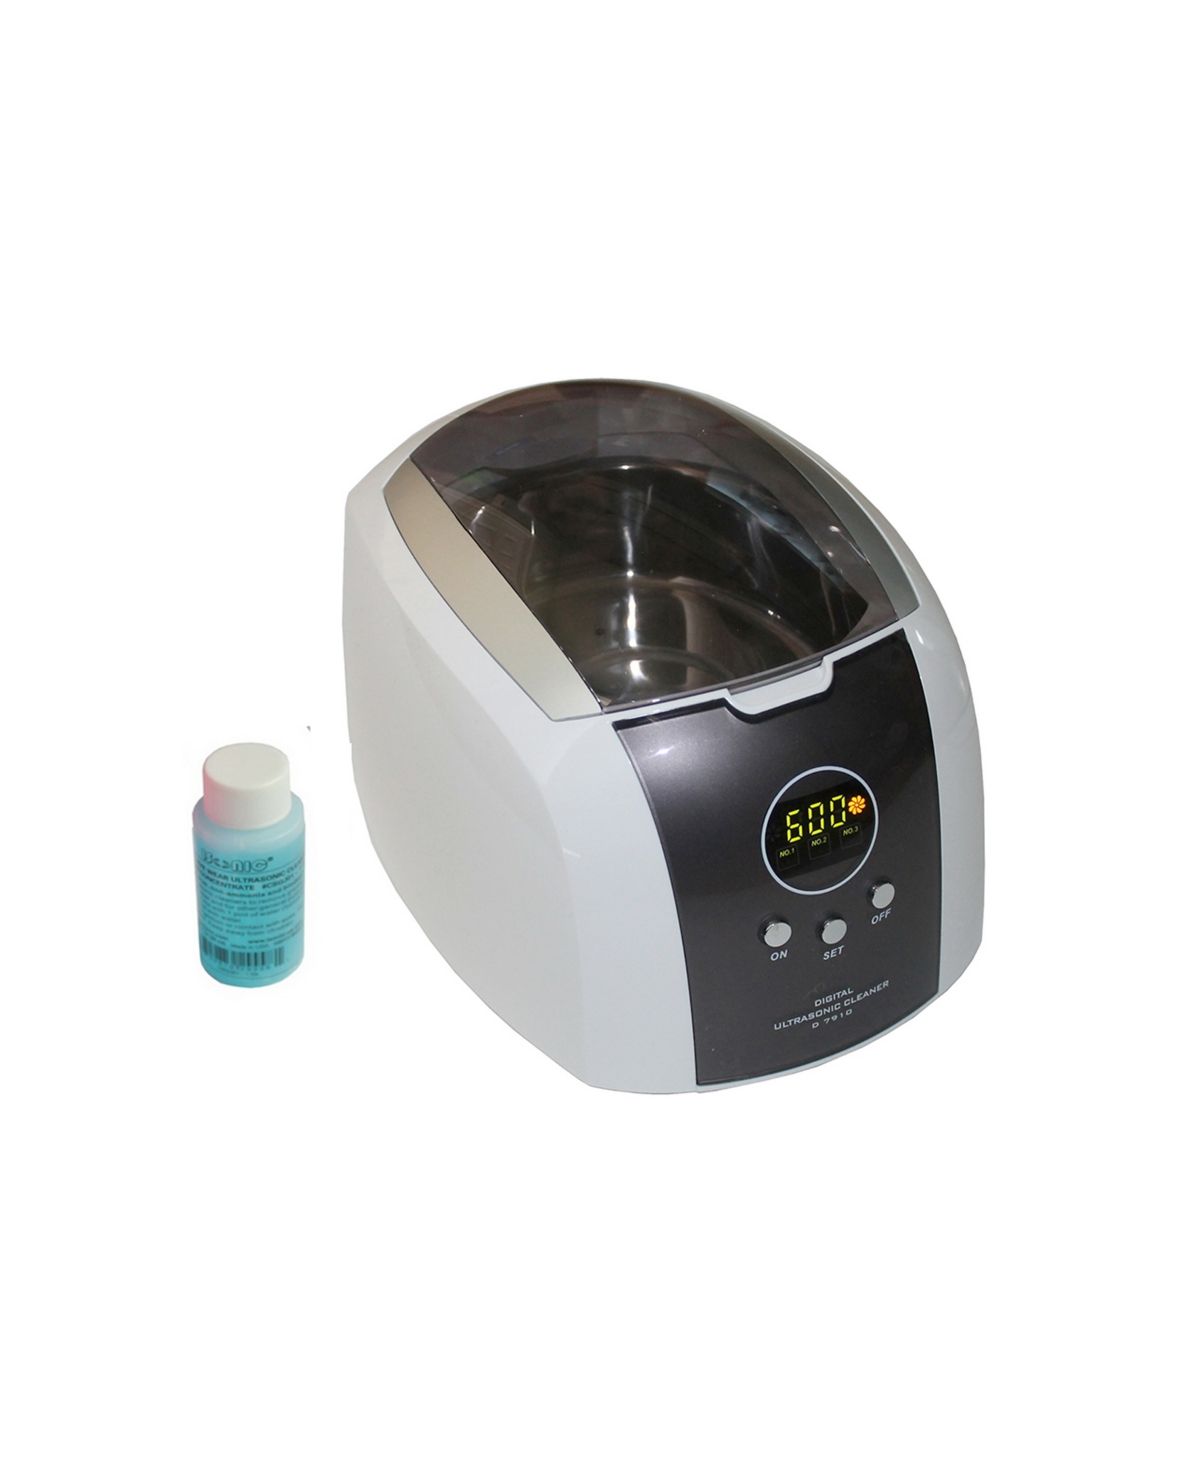 iSonic D7910B Digital Ultrasonic Cleaner for Jewelry, Eyeglasses and Watches | Macys (US)